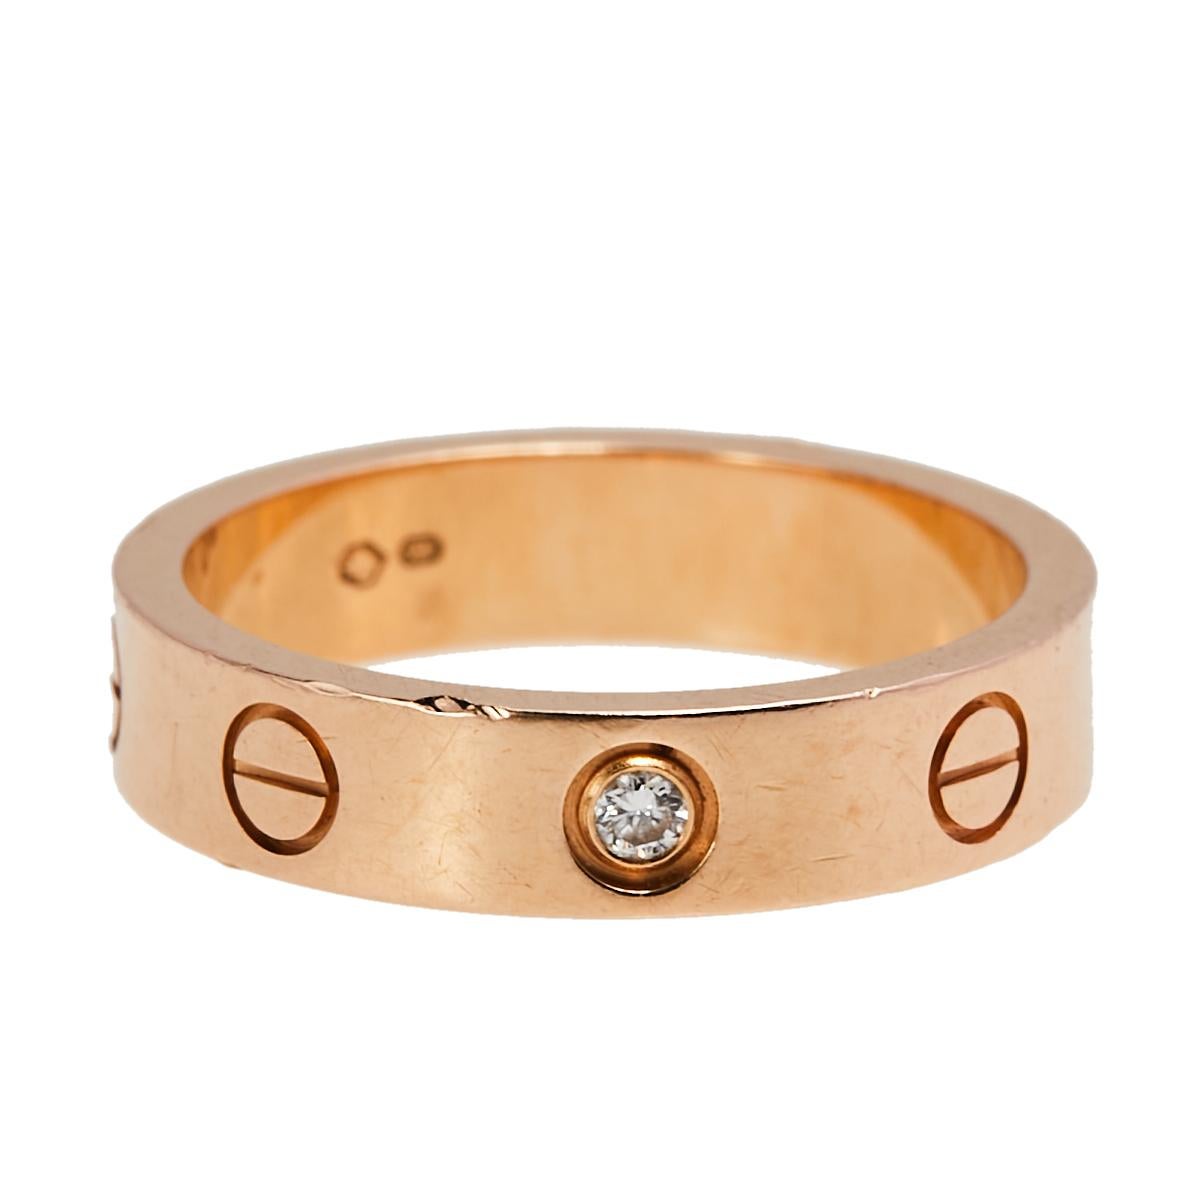 One of the most iconic and loved designs from the house of Cartier, this stunning Love ring is an icon of style and luxury. Constructed in 18k rose gold, this ring features screw details all around the surface as symbols of a sealed and secured bond